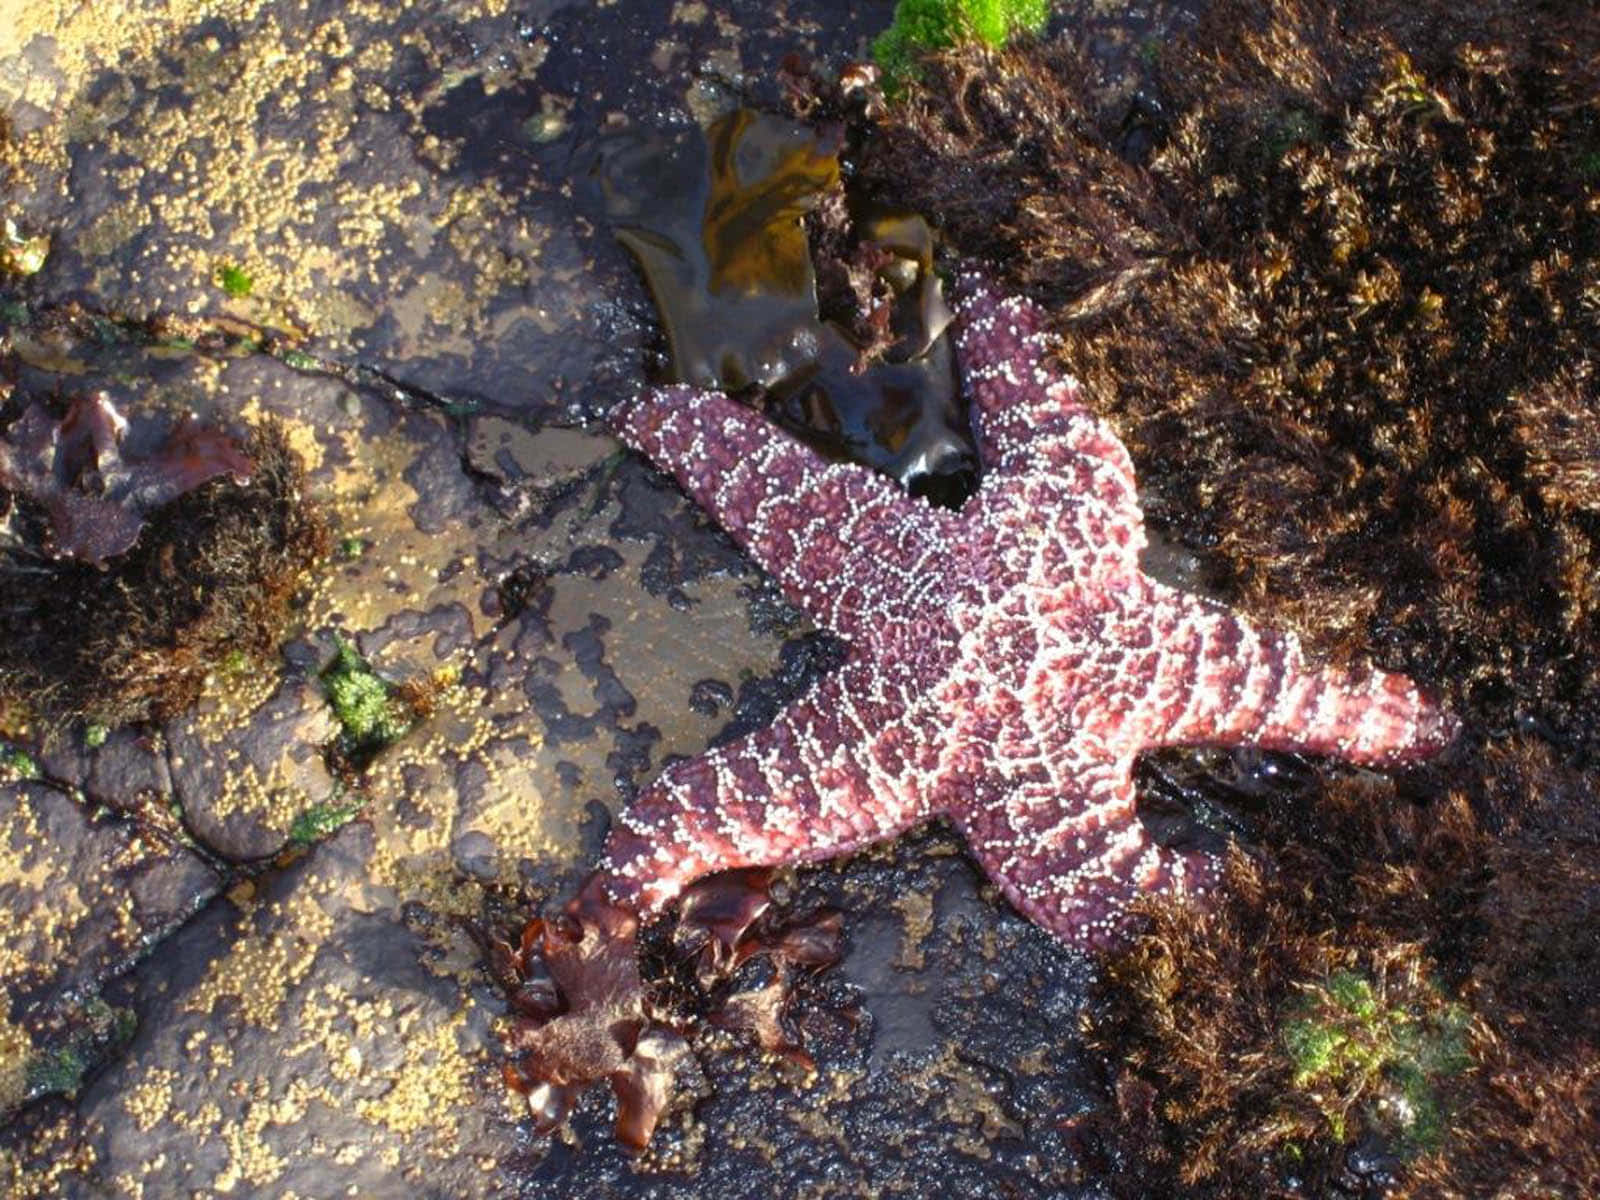 Close Up of A Starfish in The Ocean